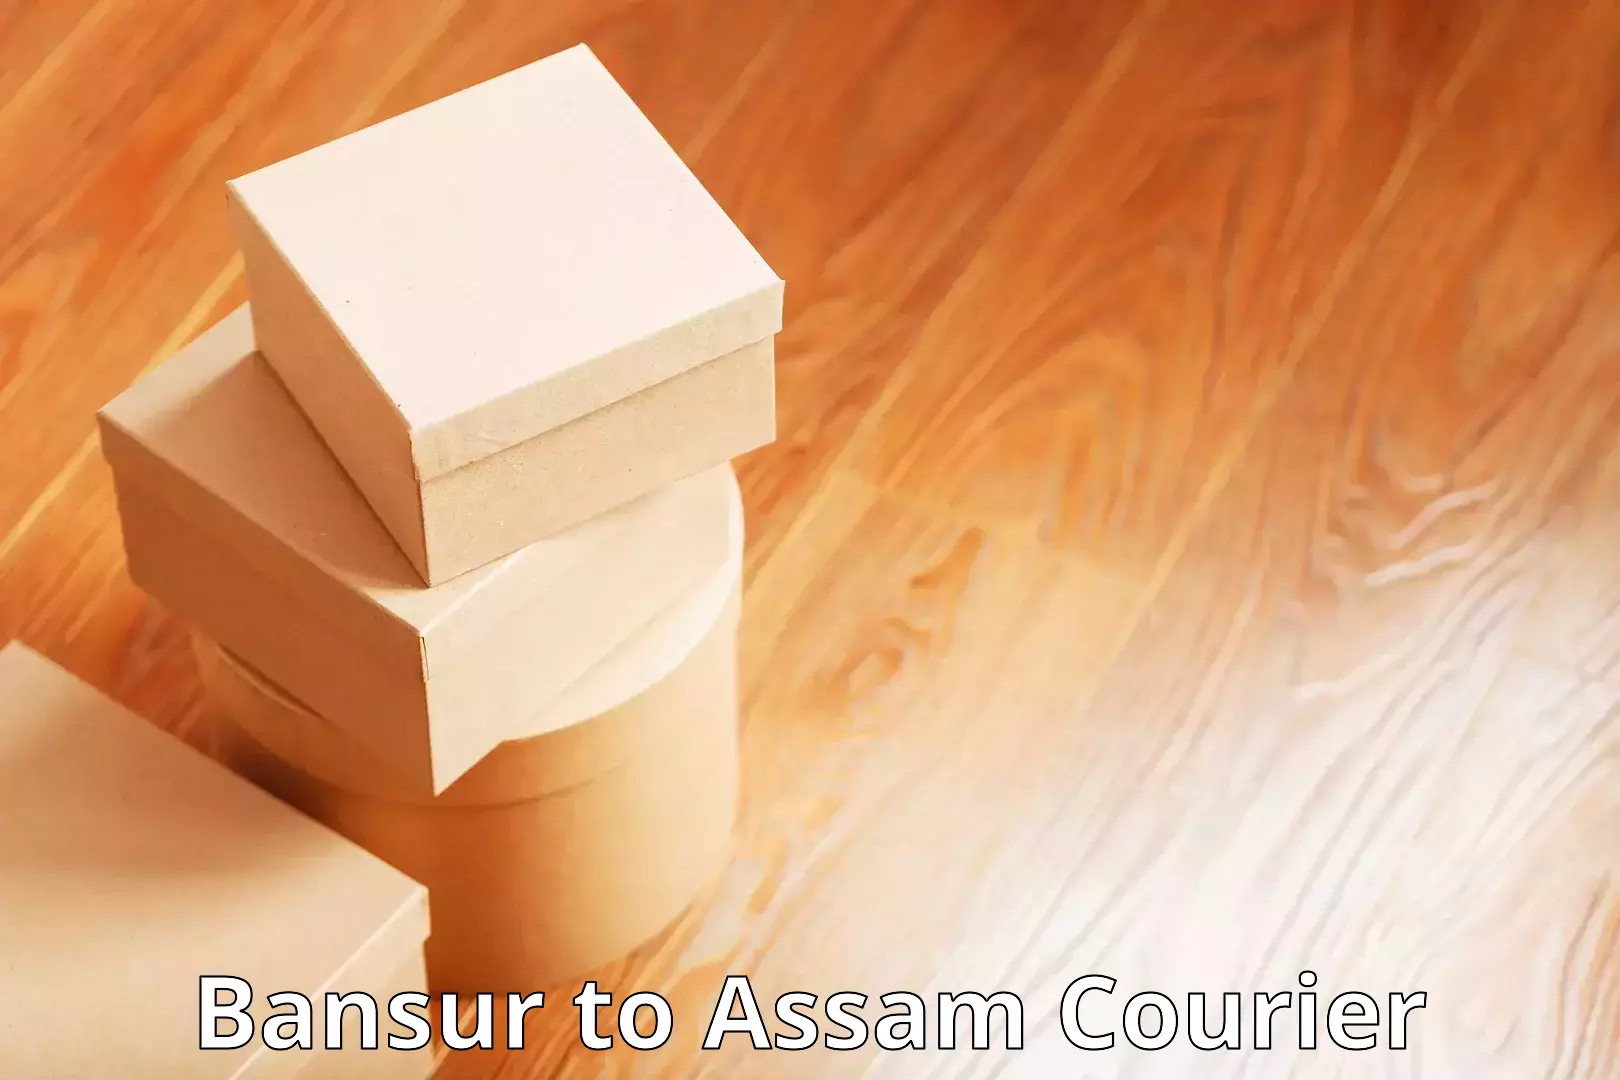 Global shipping solutions Bansur to Assam